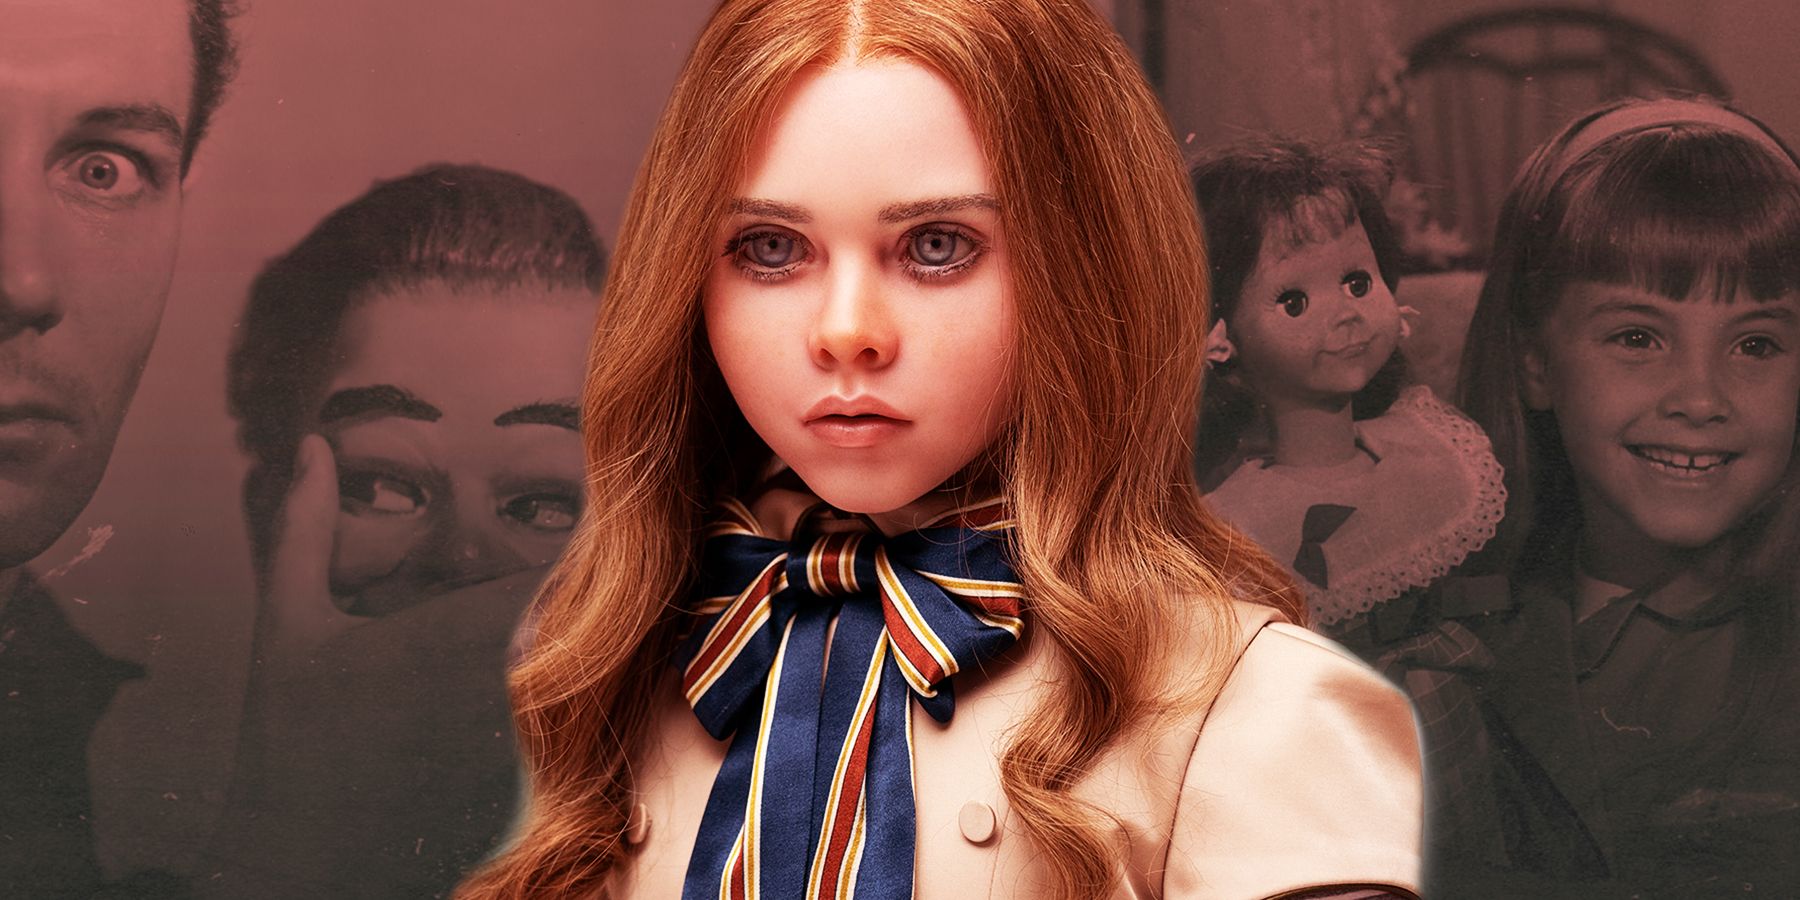 M3GAN's Roots Lie in a Vastly Different (But Still Creepy) Kind of Doll